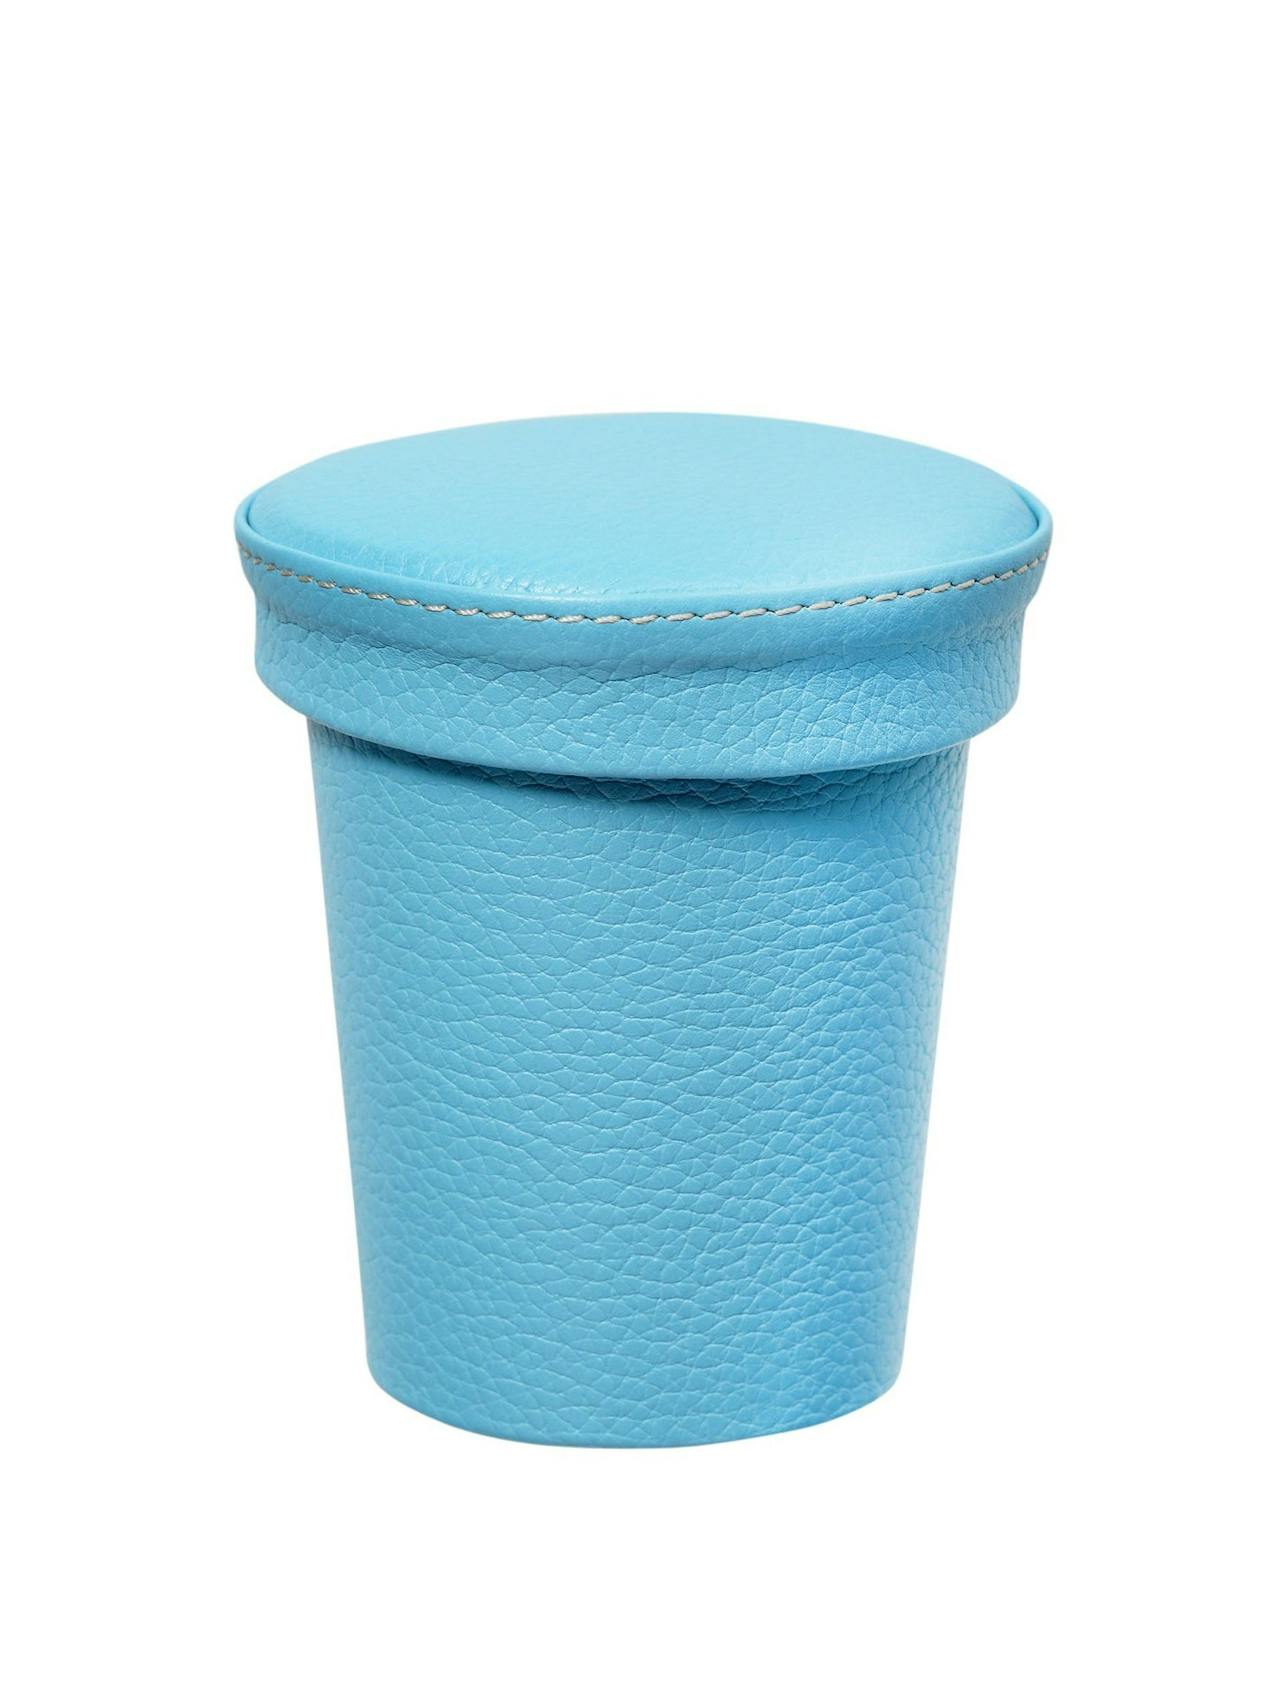 Chelsea leather dice cup in pale blue